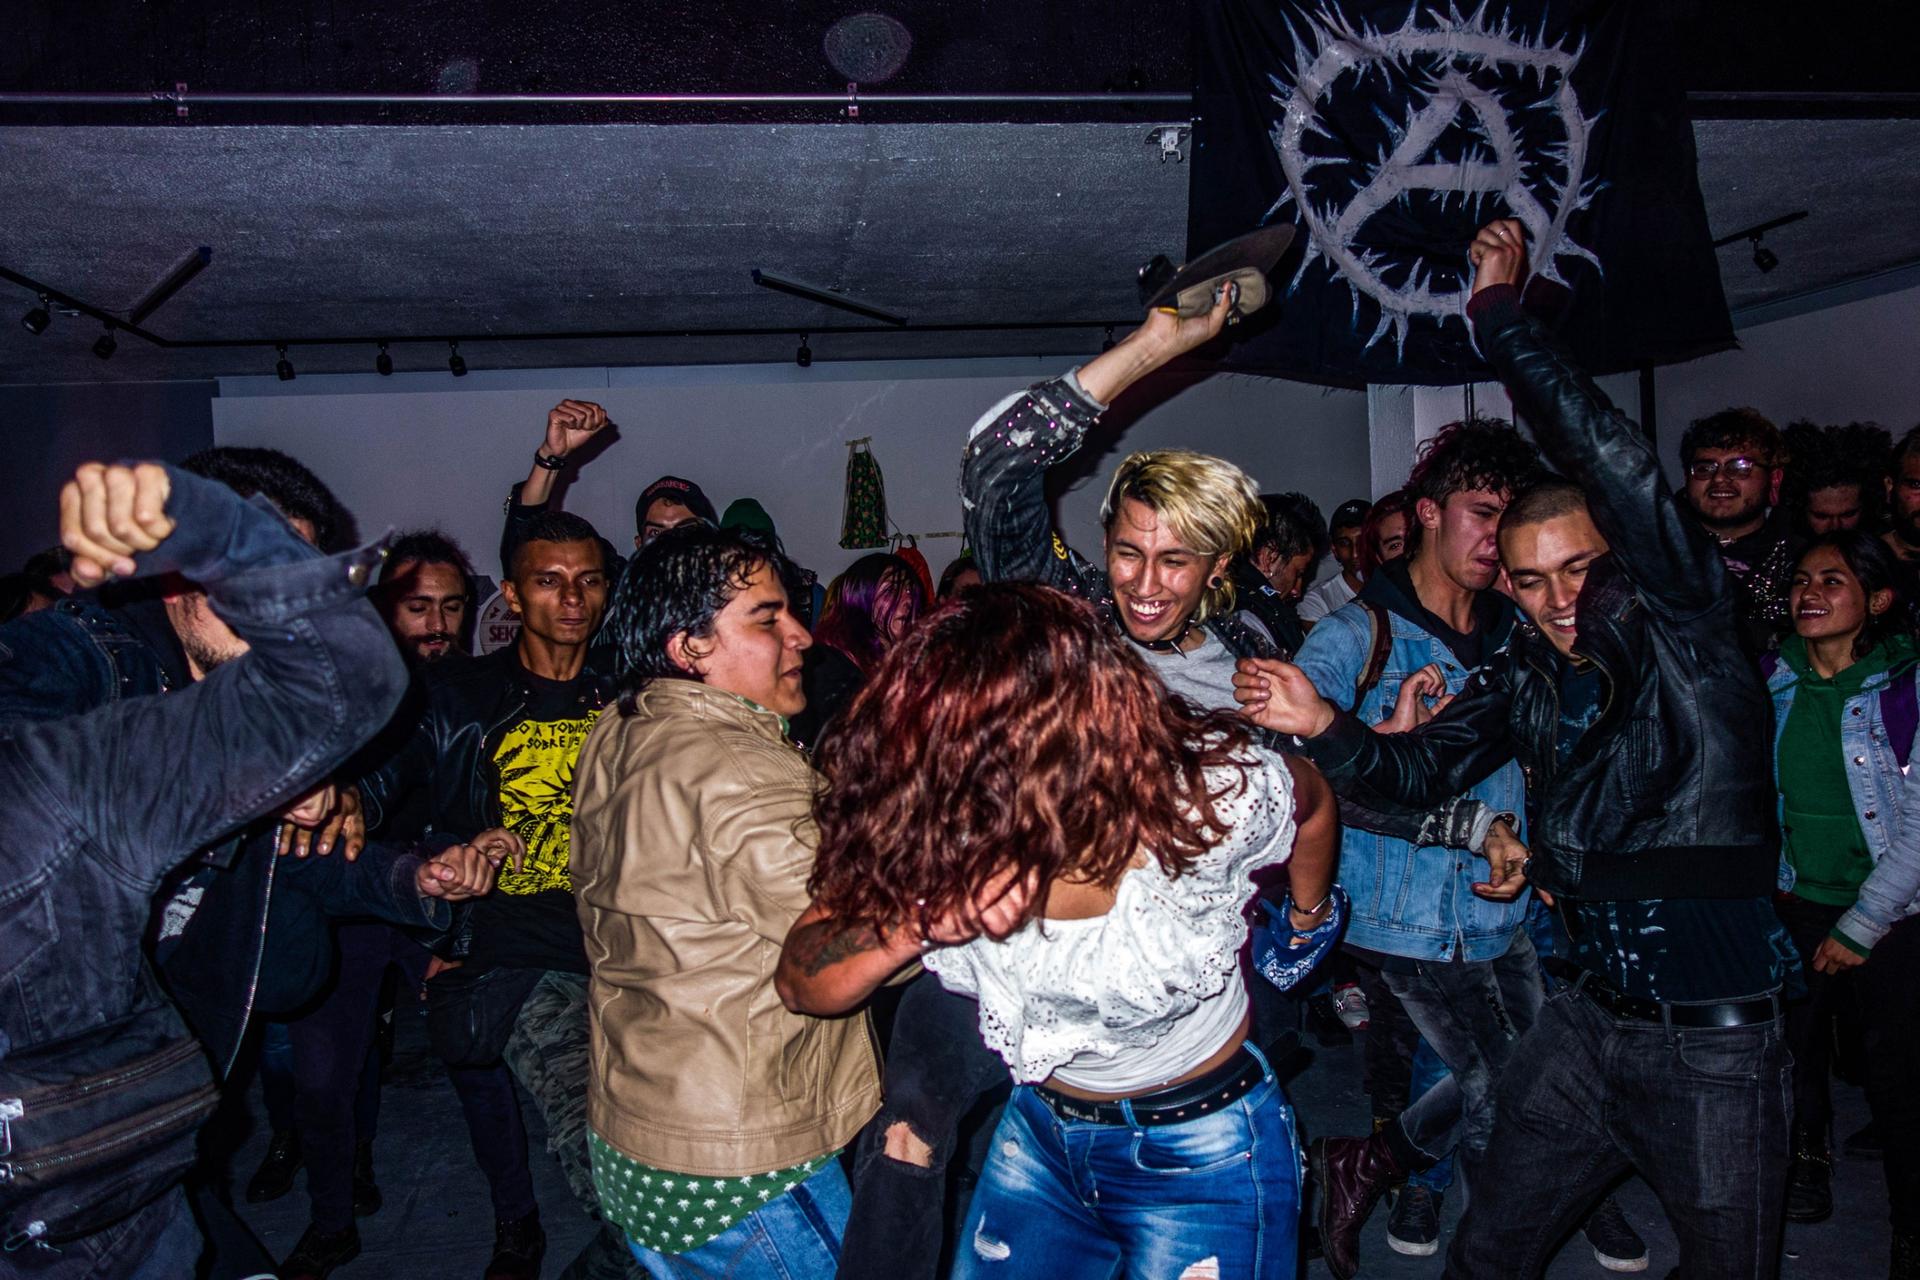 Concert-goers are shown throwing their bodies around at each other at a punk concert.